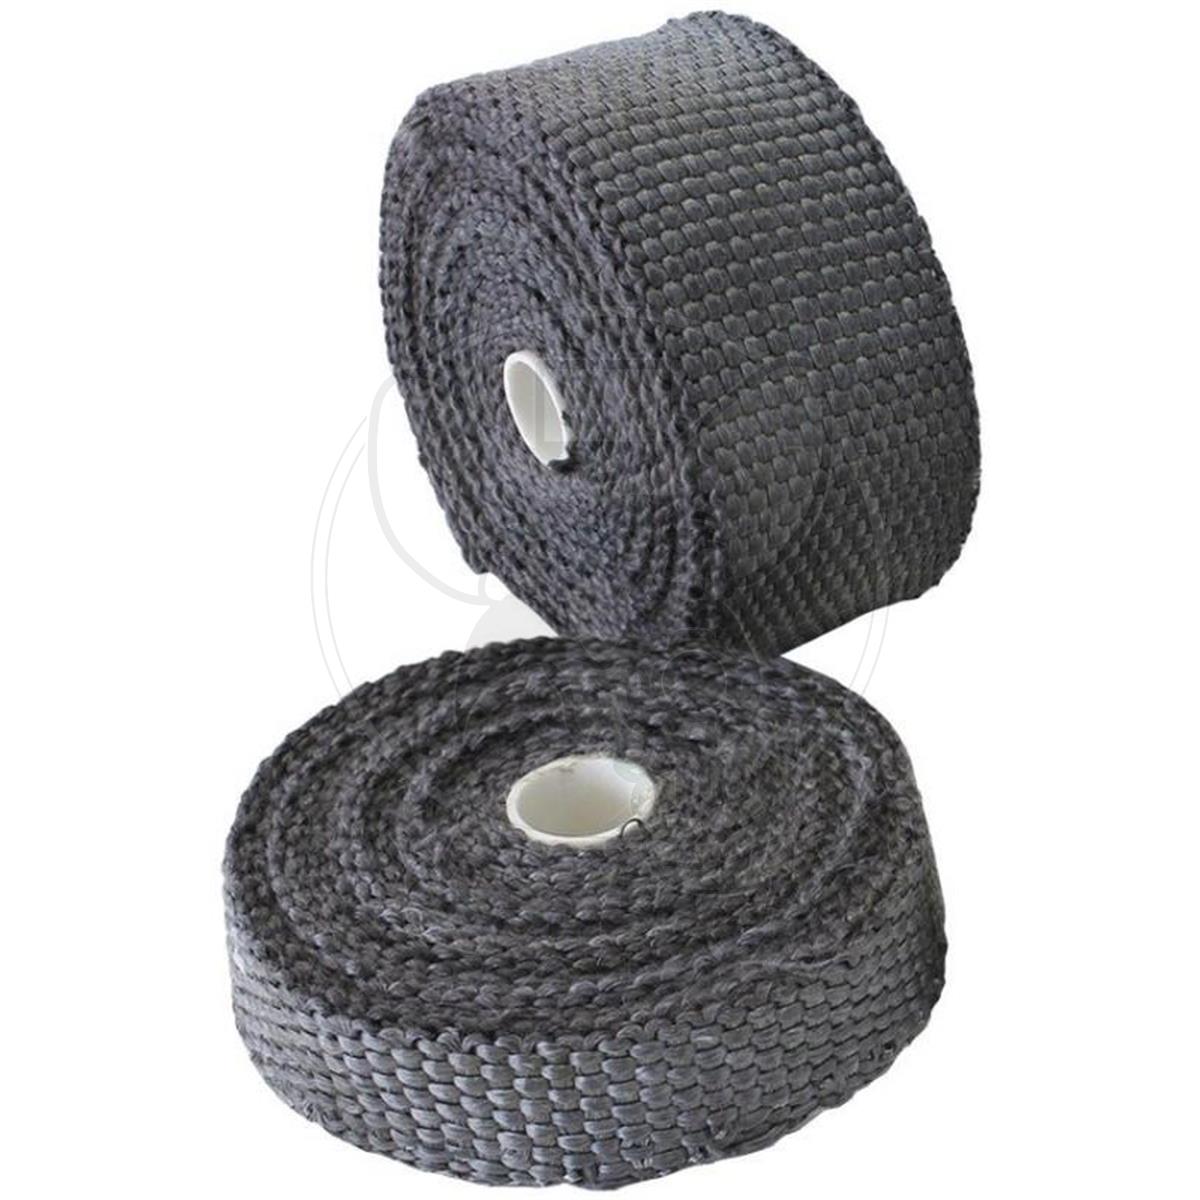 AF91-3004 Aeroflow Exhaust Insulation Wrap 1 Inch Wide 50ft Length Black 